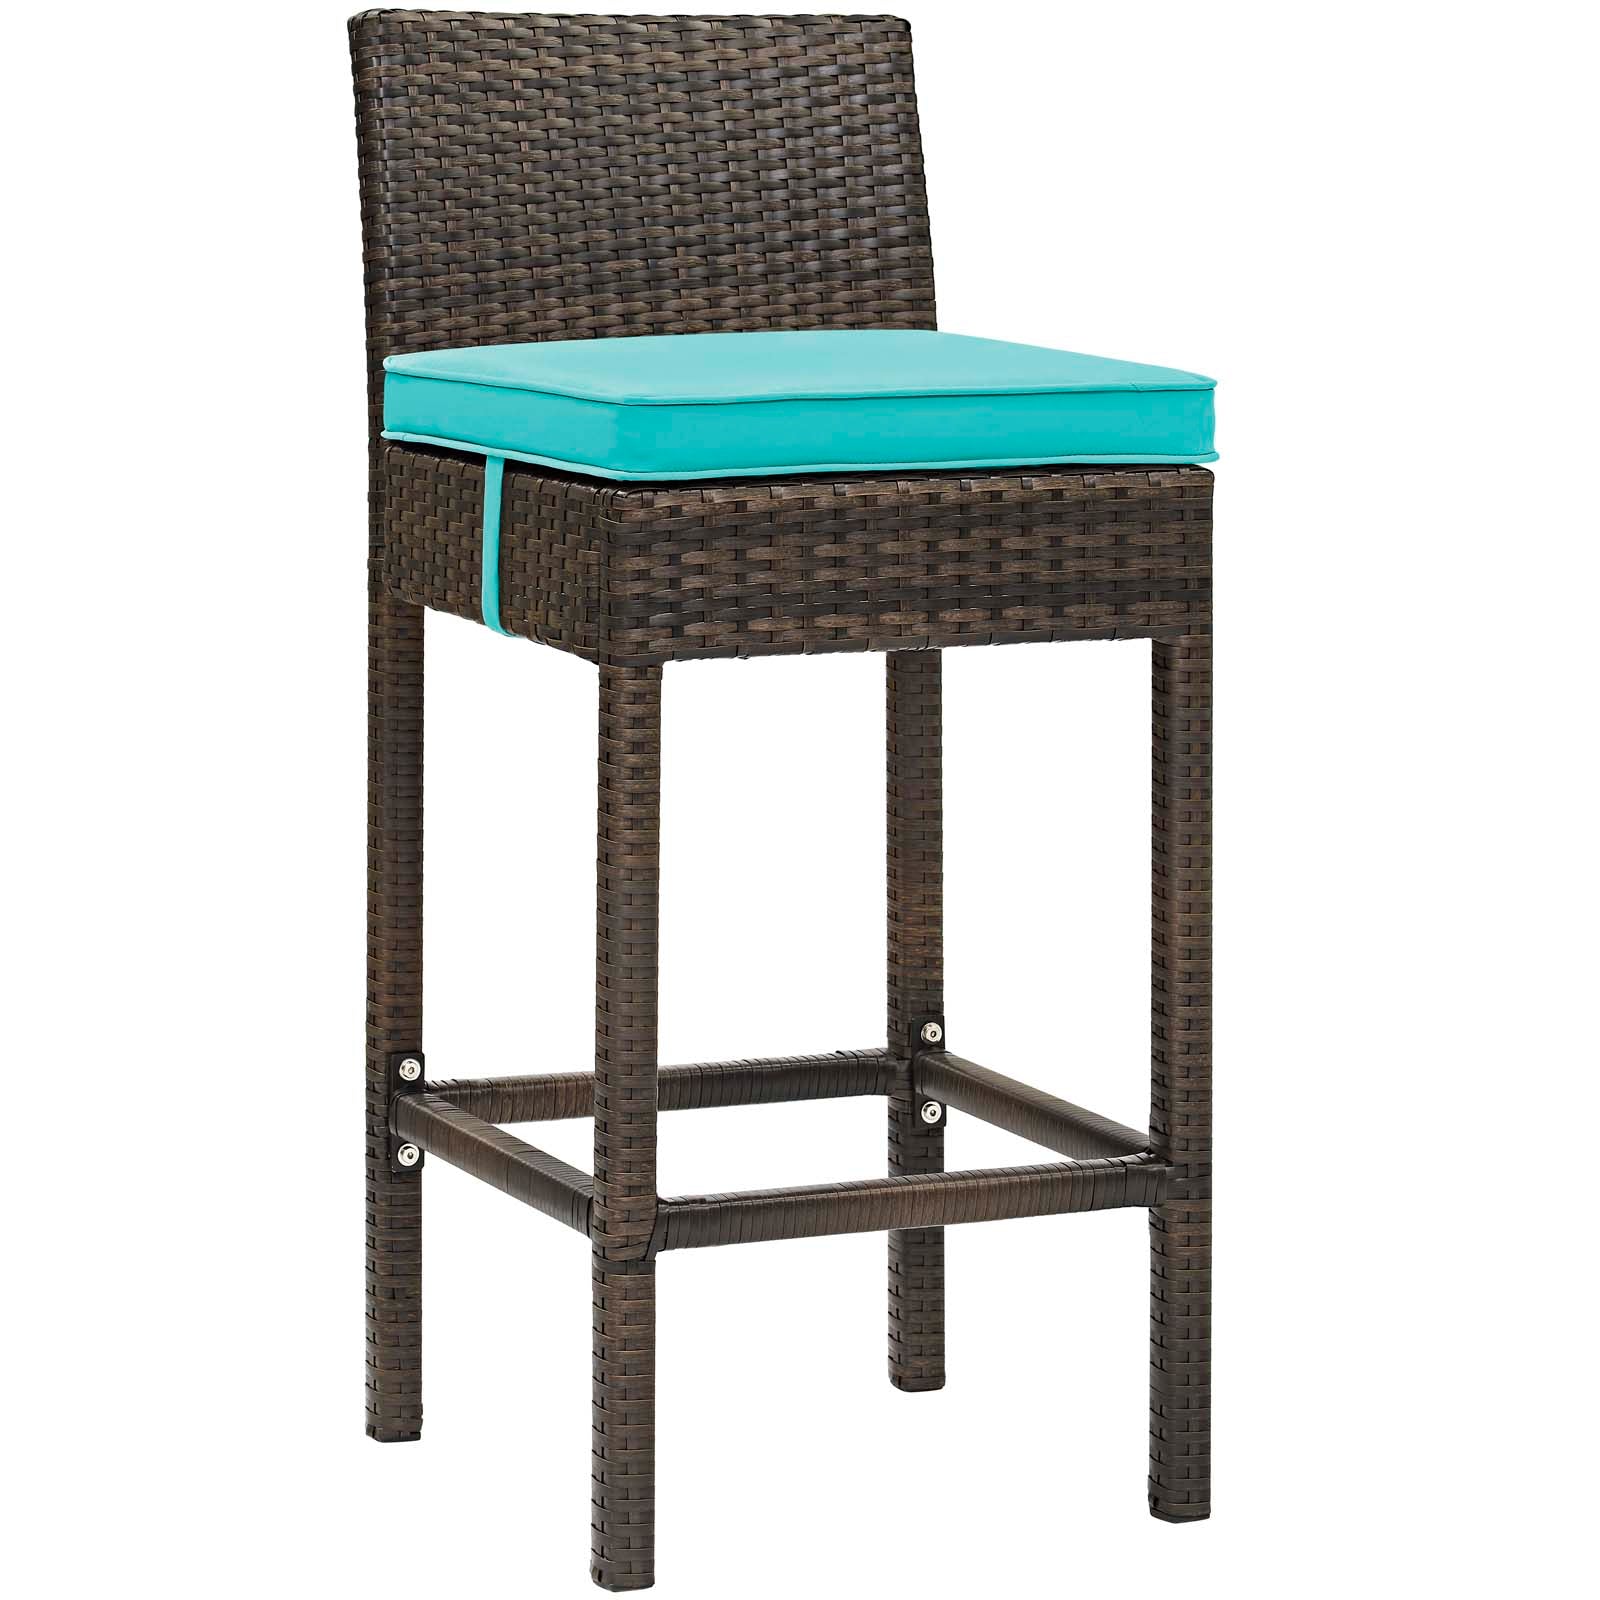 Modway Outdoor Barstools - Conduit Outdoor Patio Wicker Rattan Bar Stool Brown Turquoise